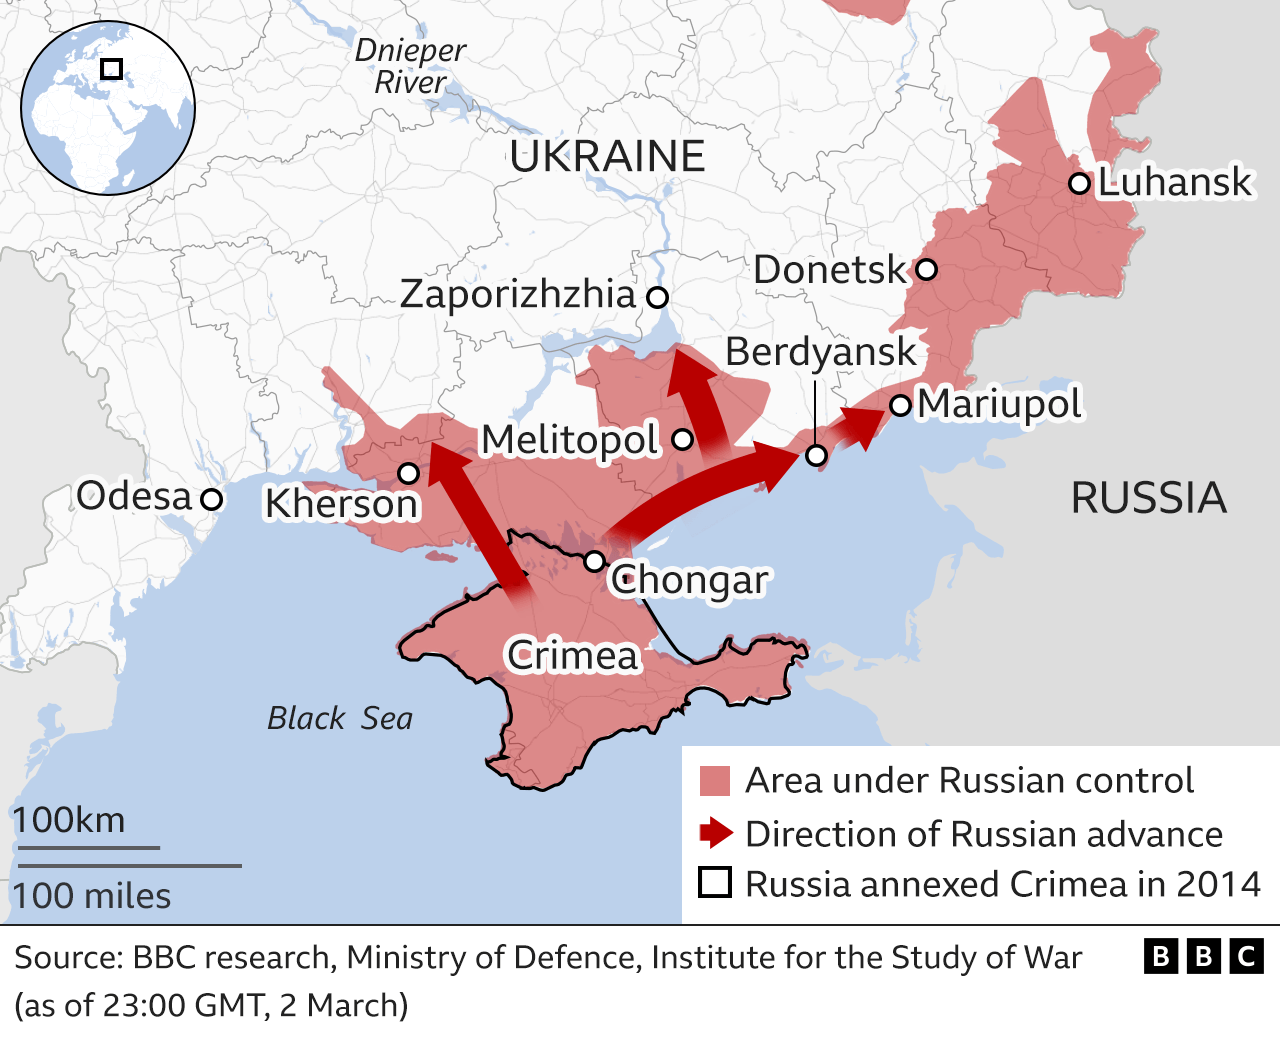 Map showing the Russian military advance into Ukraine from the south